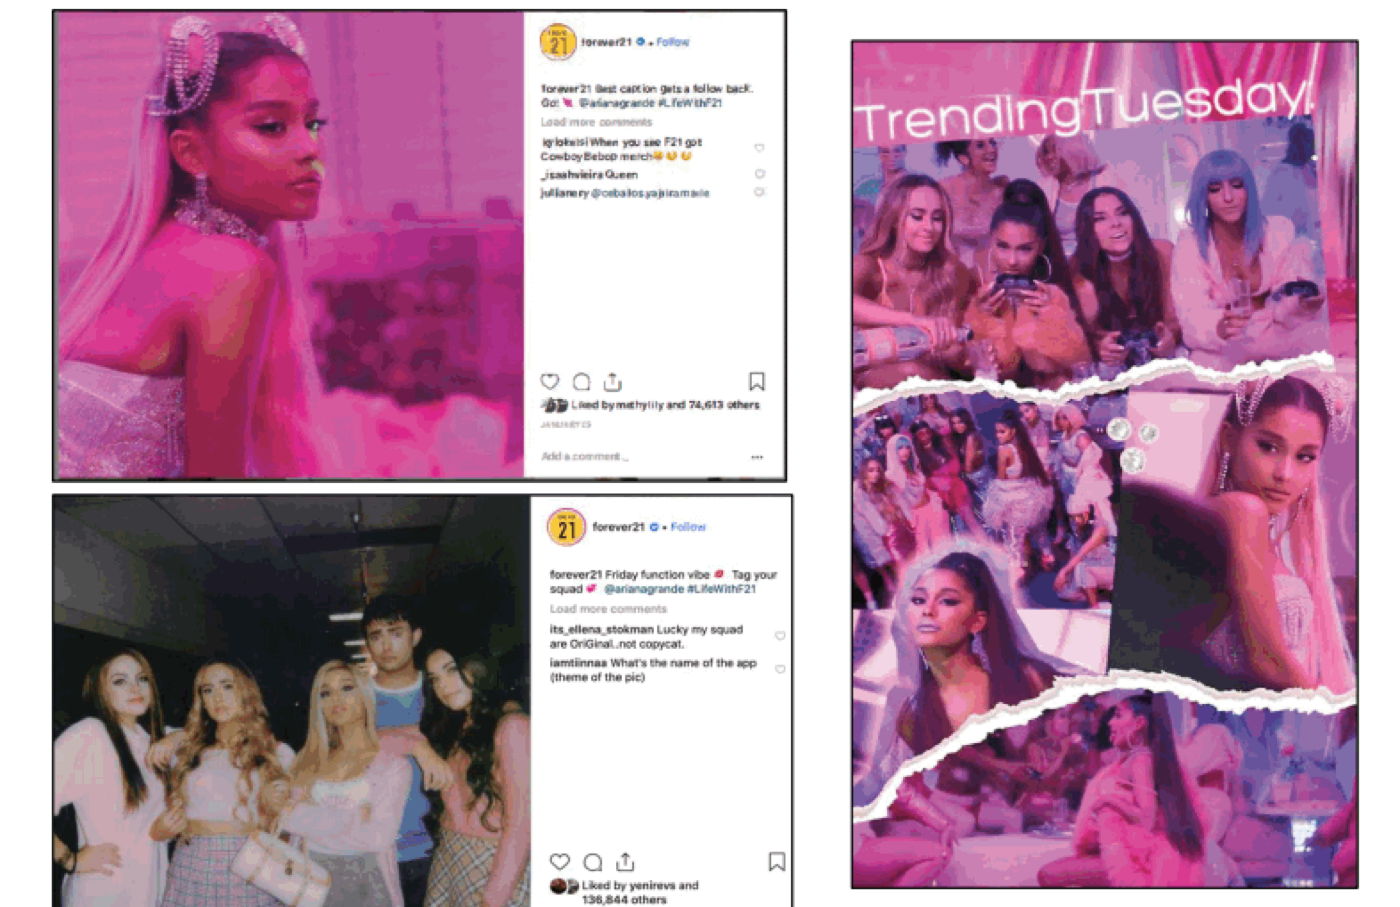 Ariana Grande Sues Forever 21 For 10 Million Over Look Alike Ad Campaign